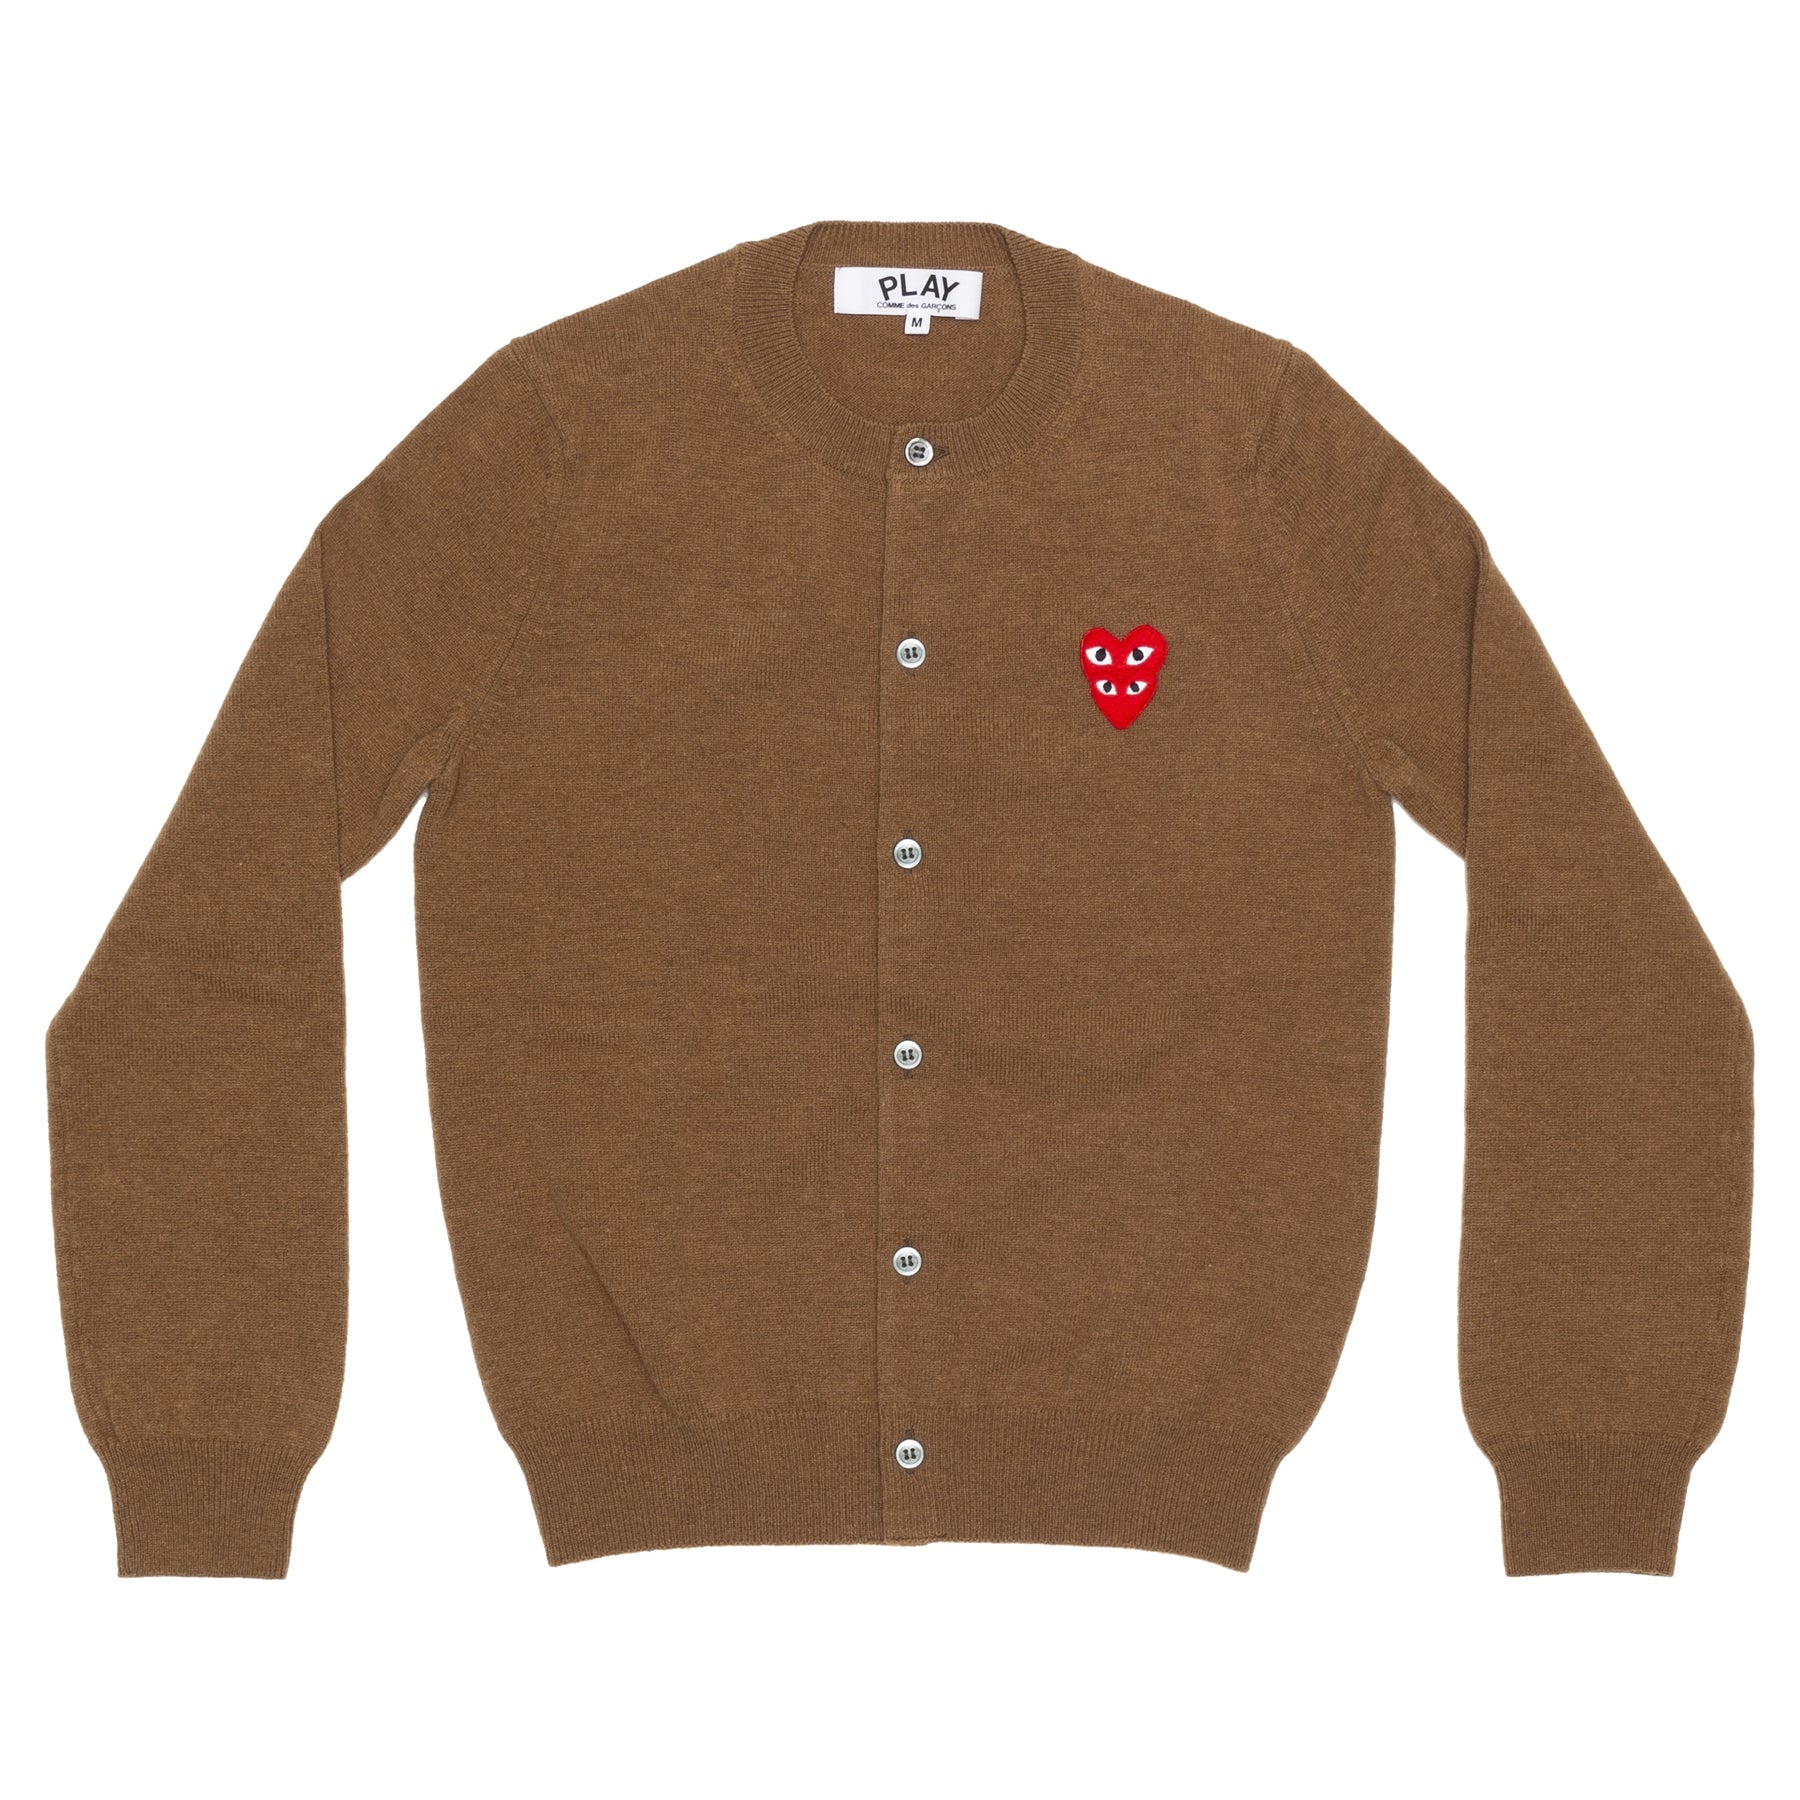 PLAY CDG - DOUBLE RED HEART WOMEN'S CREW NECK CARDIGAN - (BROWN) view 1